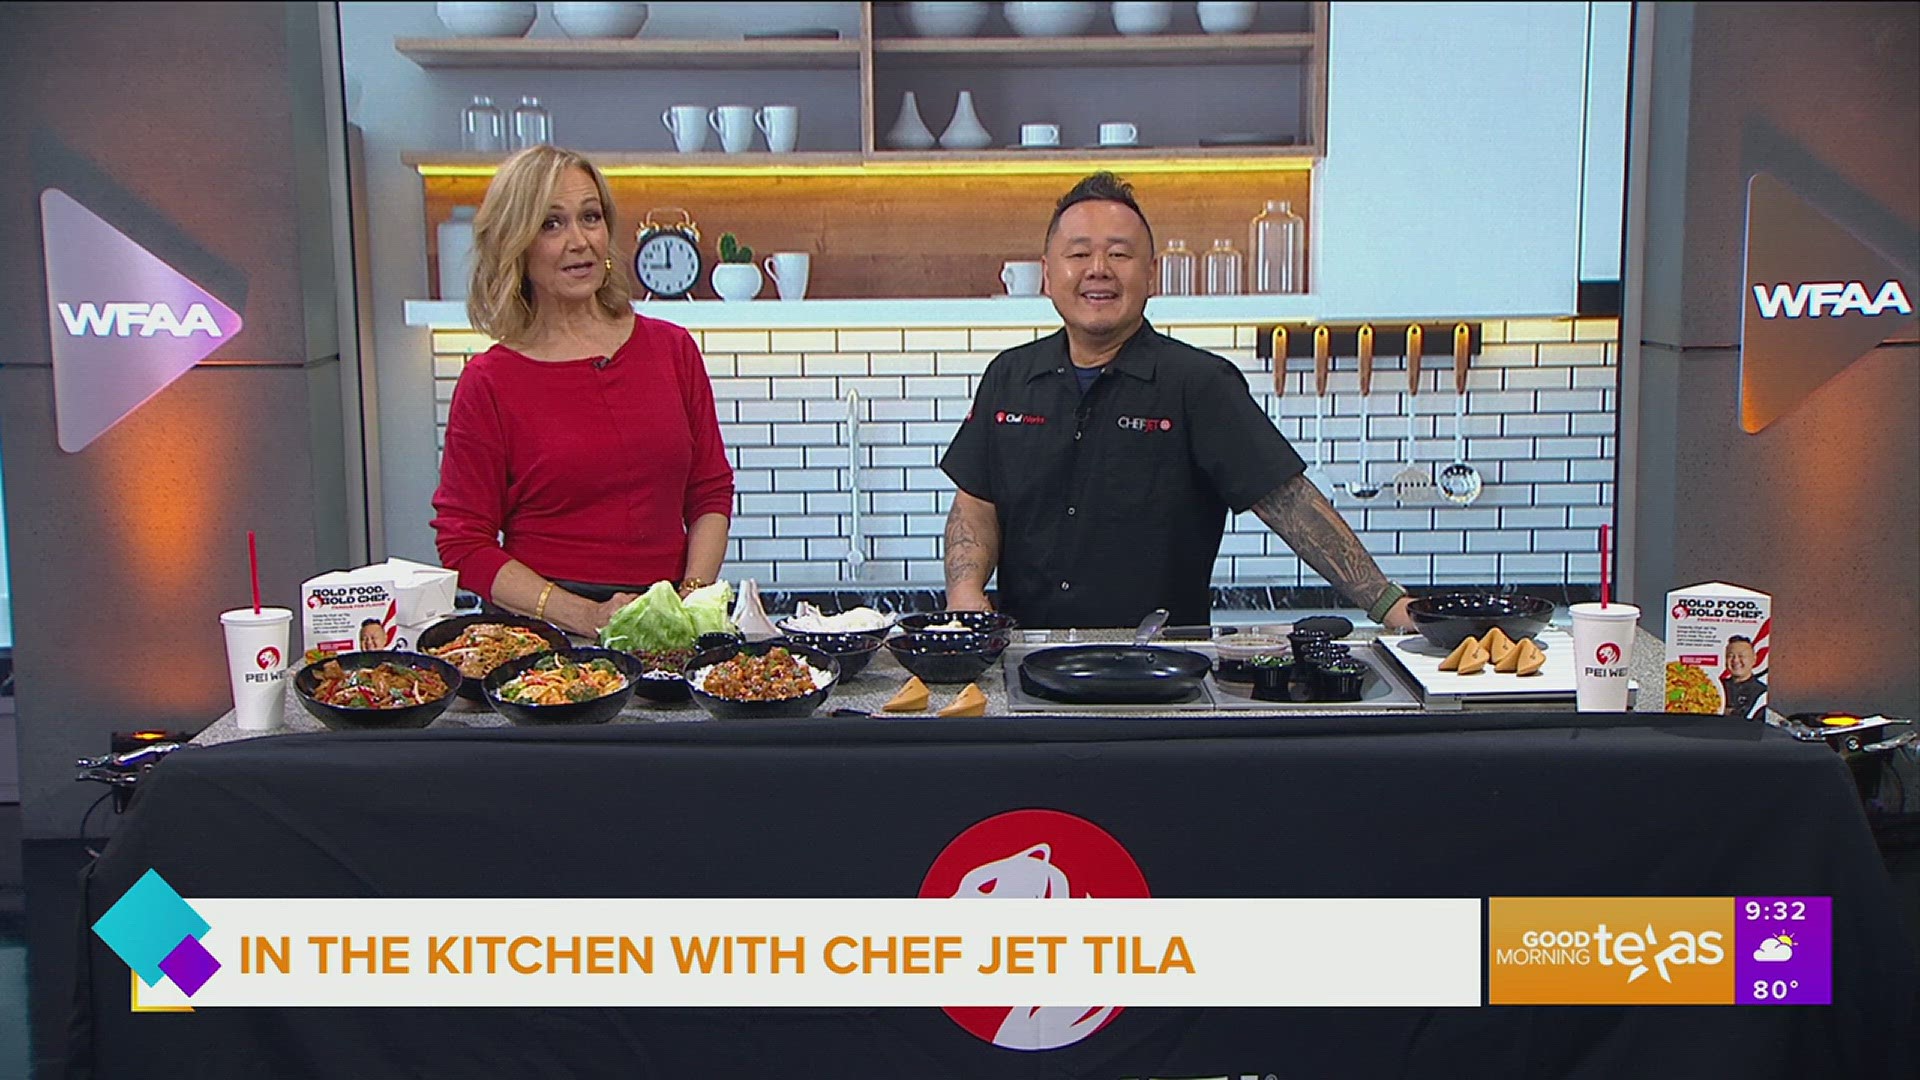 Celebrity Chef Jet Tila shares some of the new dishes he curated tor Pei Wei.